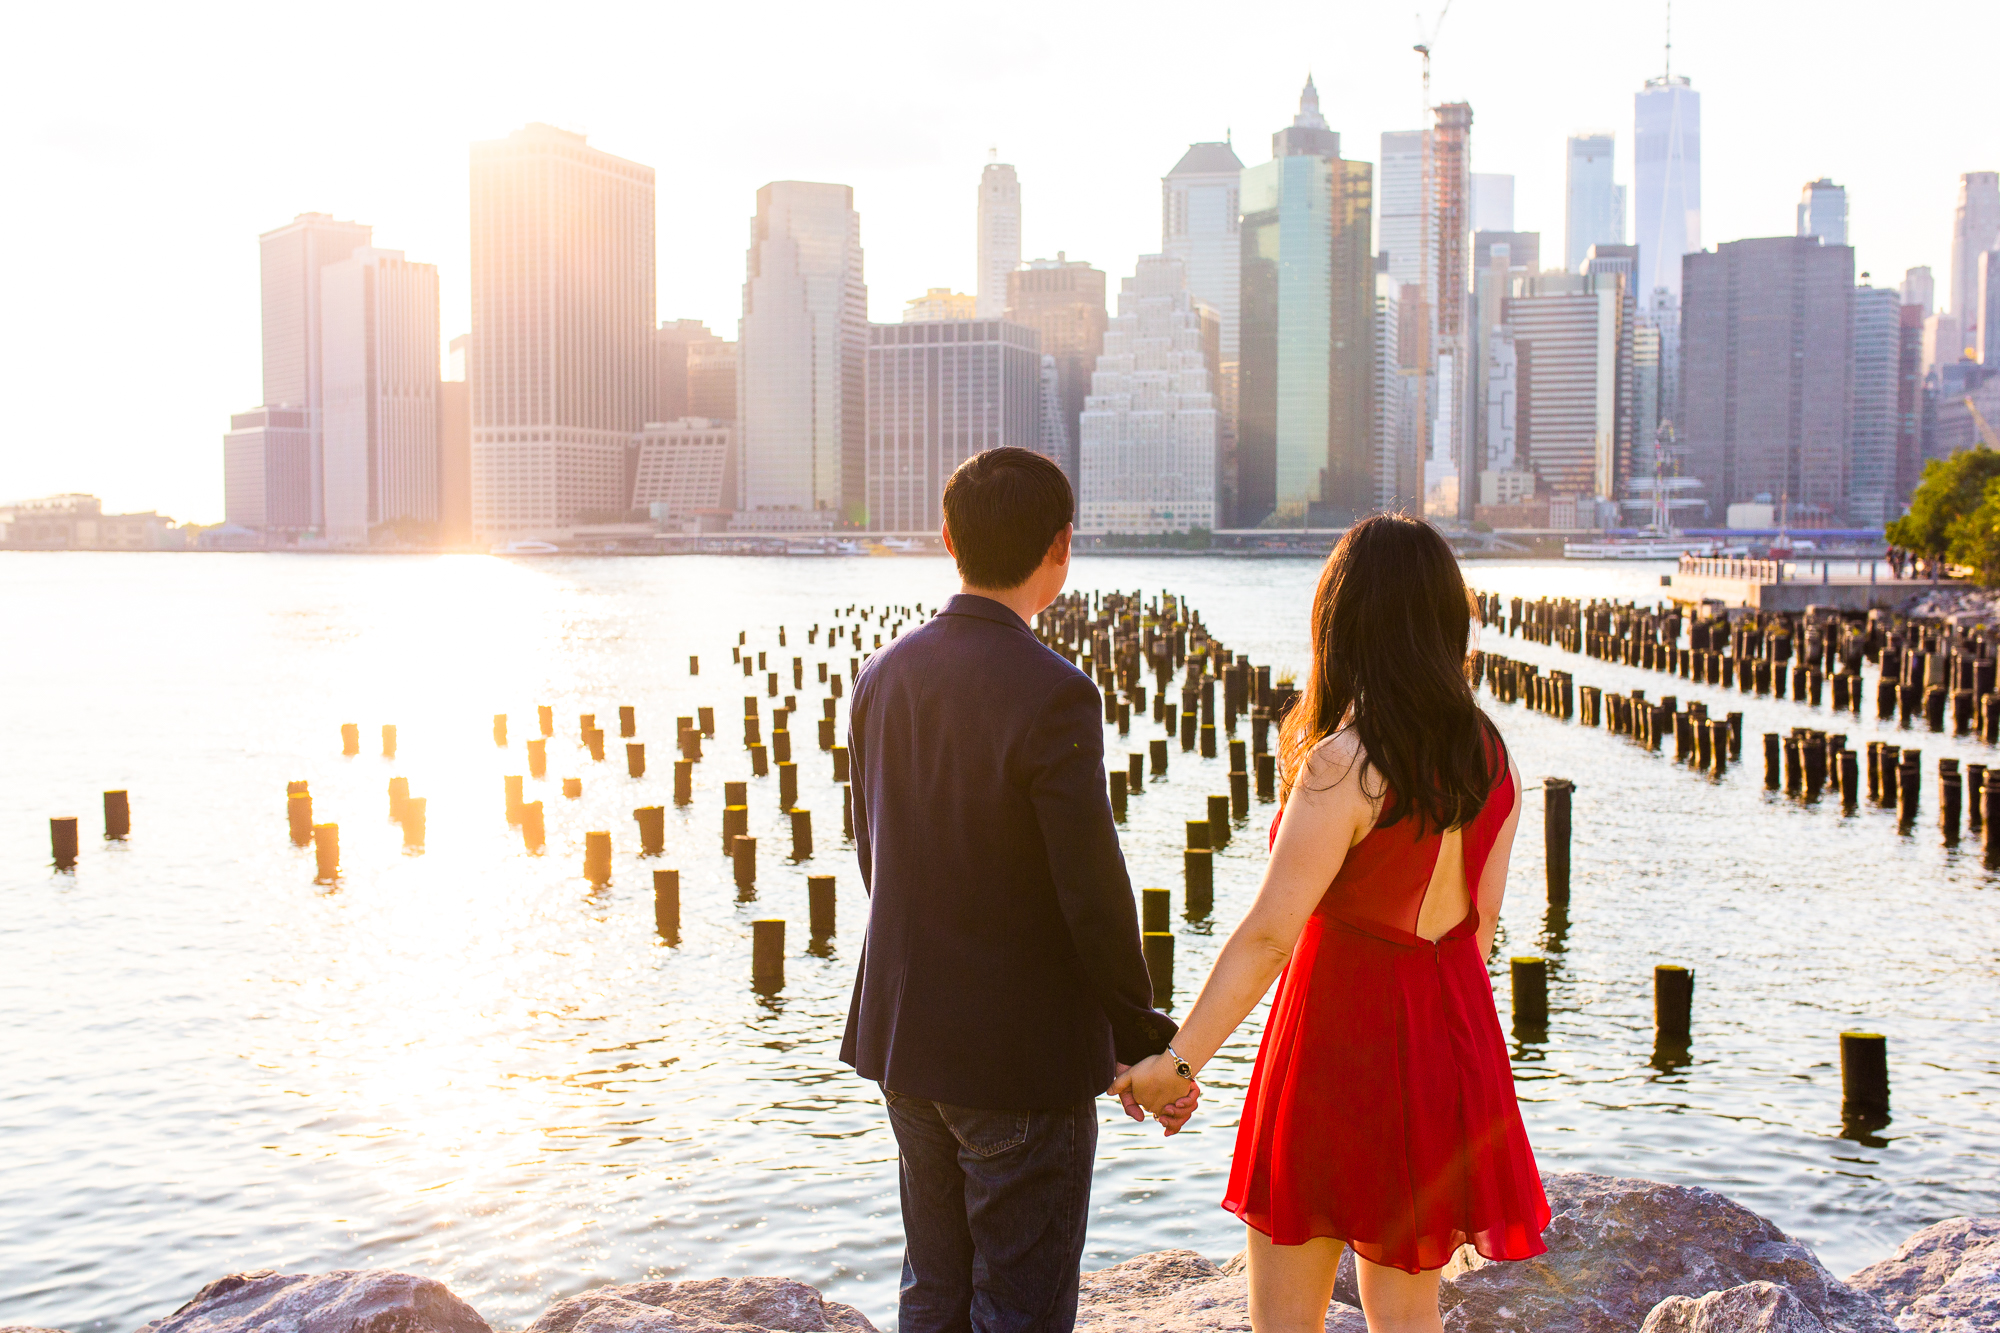 Two people holding hands look out across a bay towards the city.